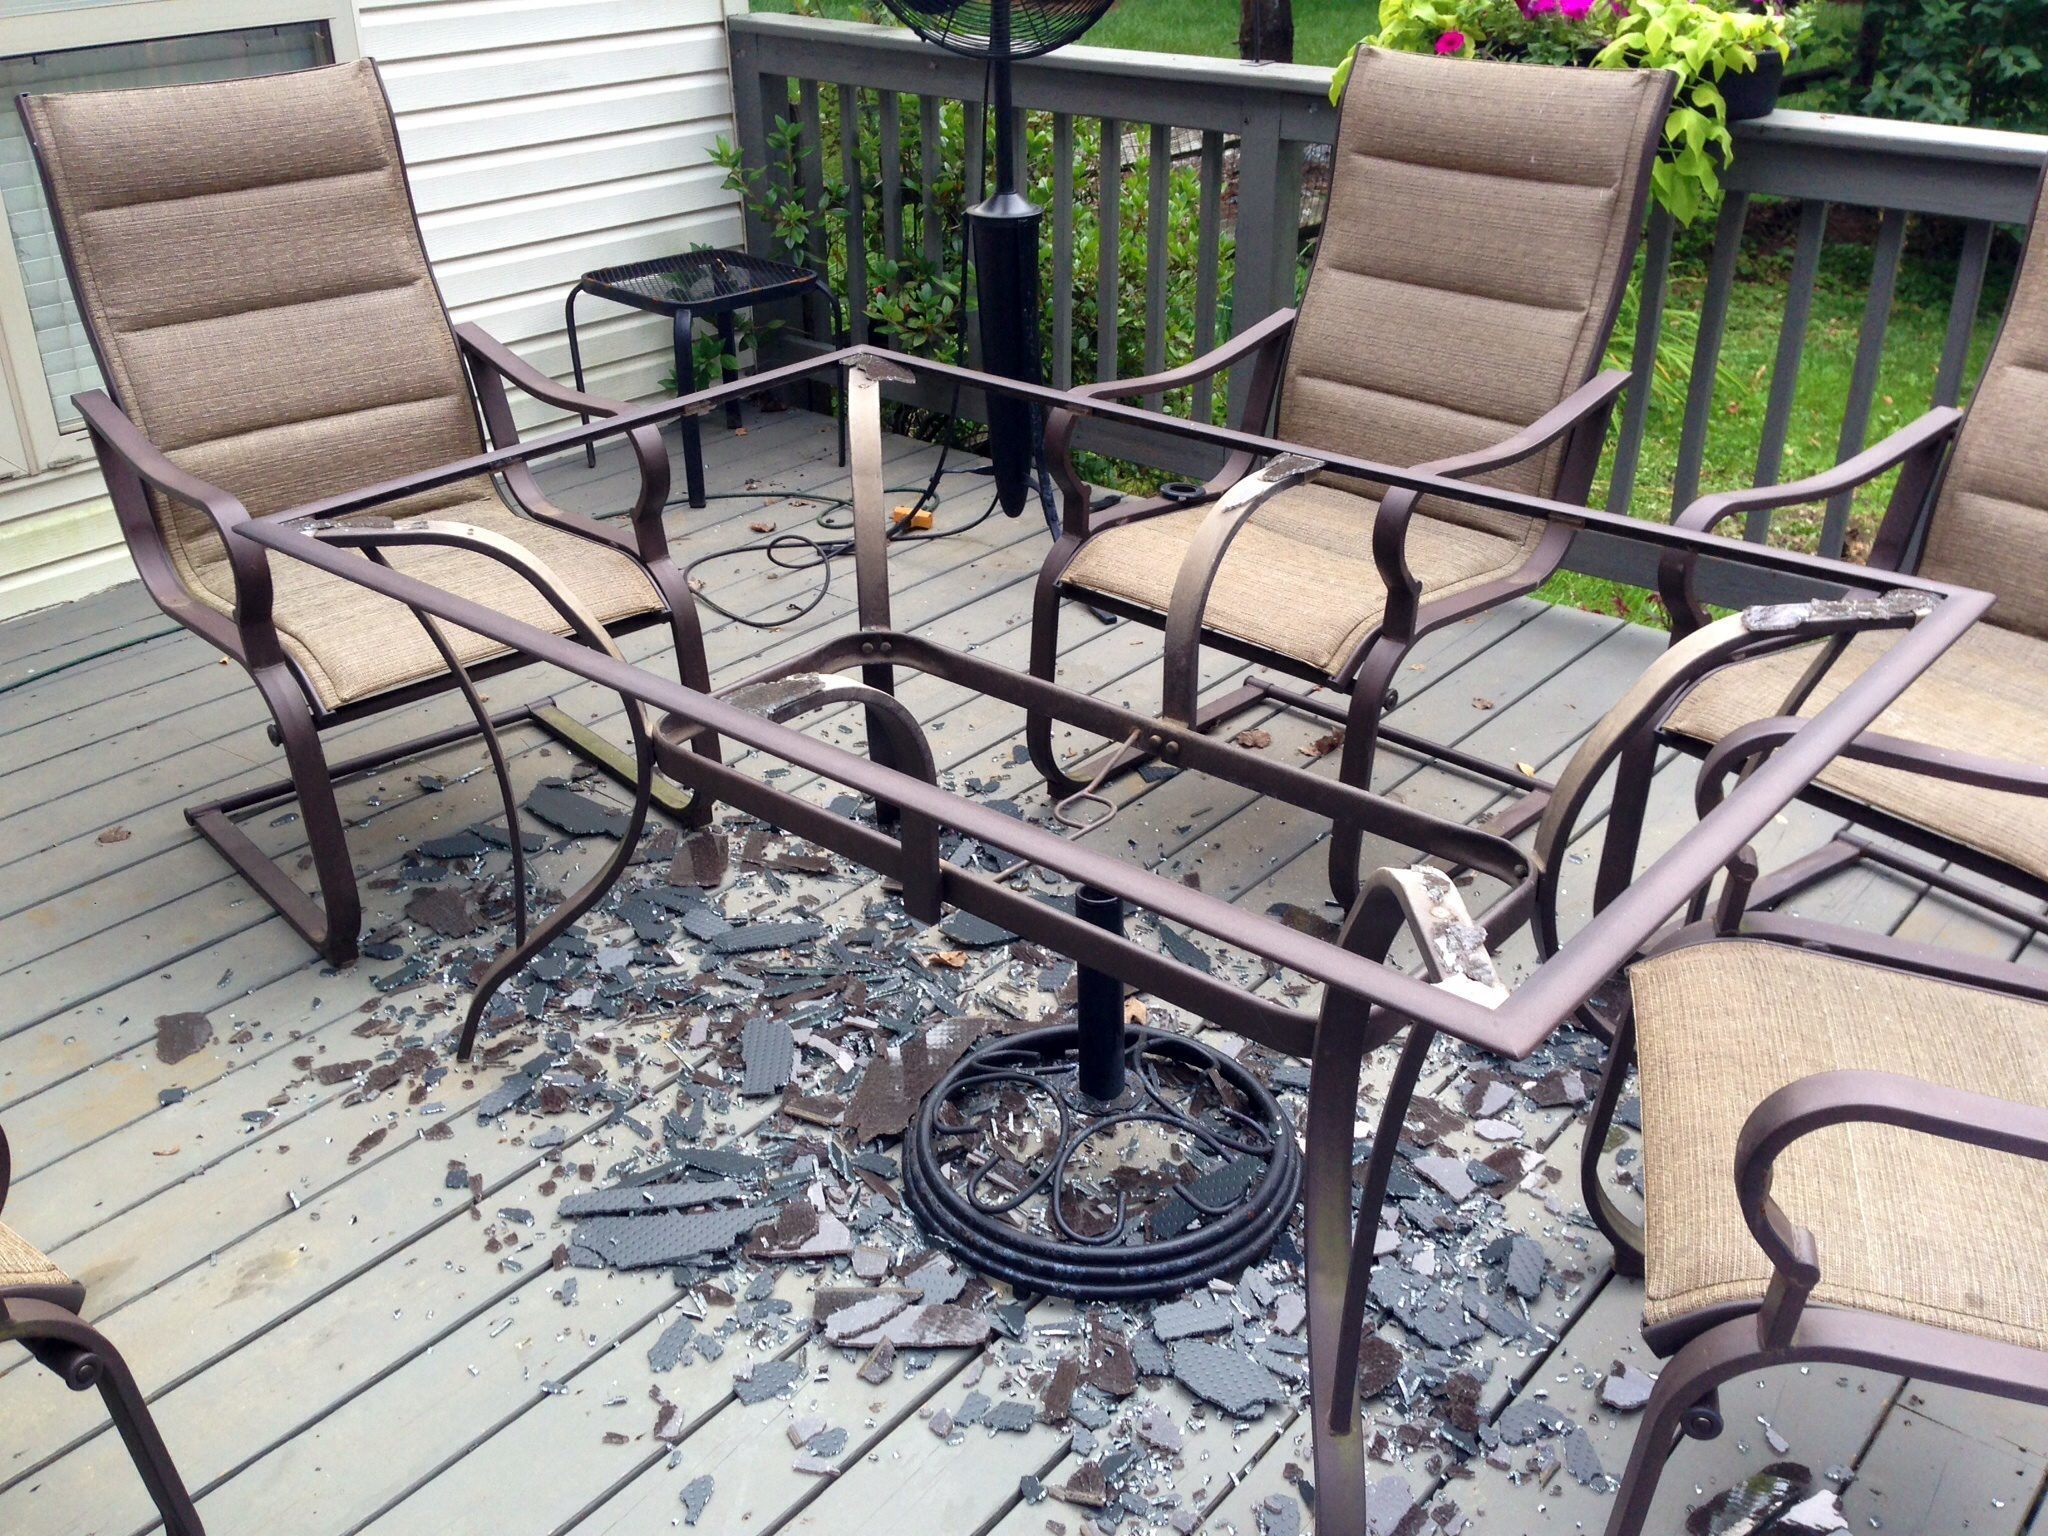 Retractable Awnings For Patios Much, How To Replace Broken Glass Patio Table